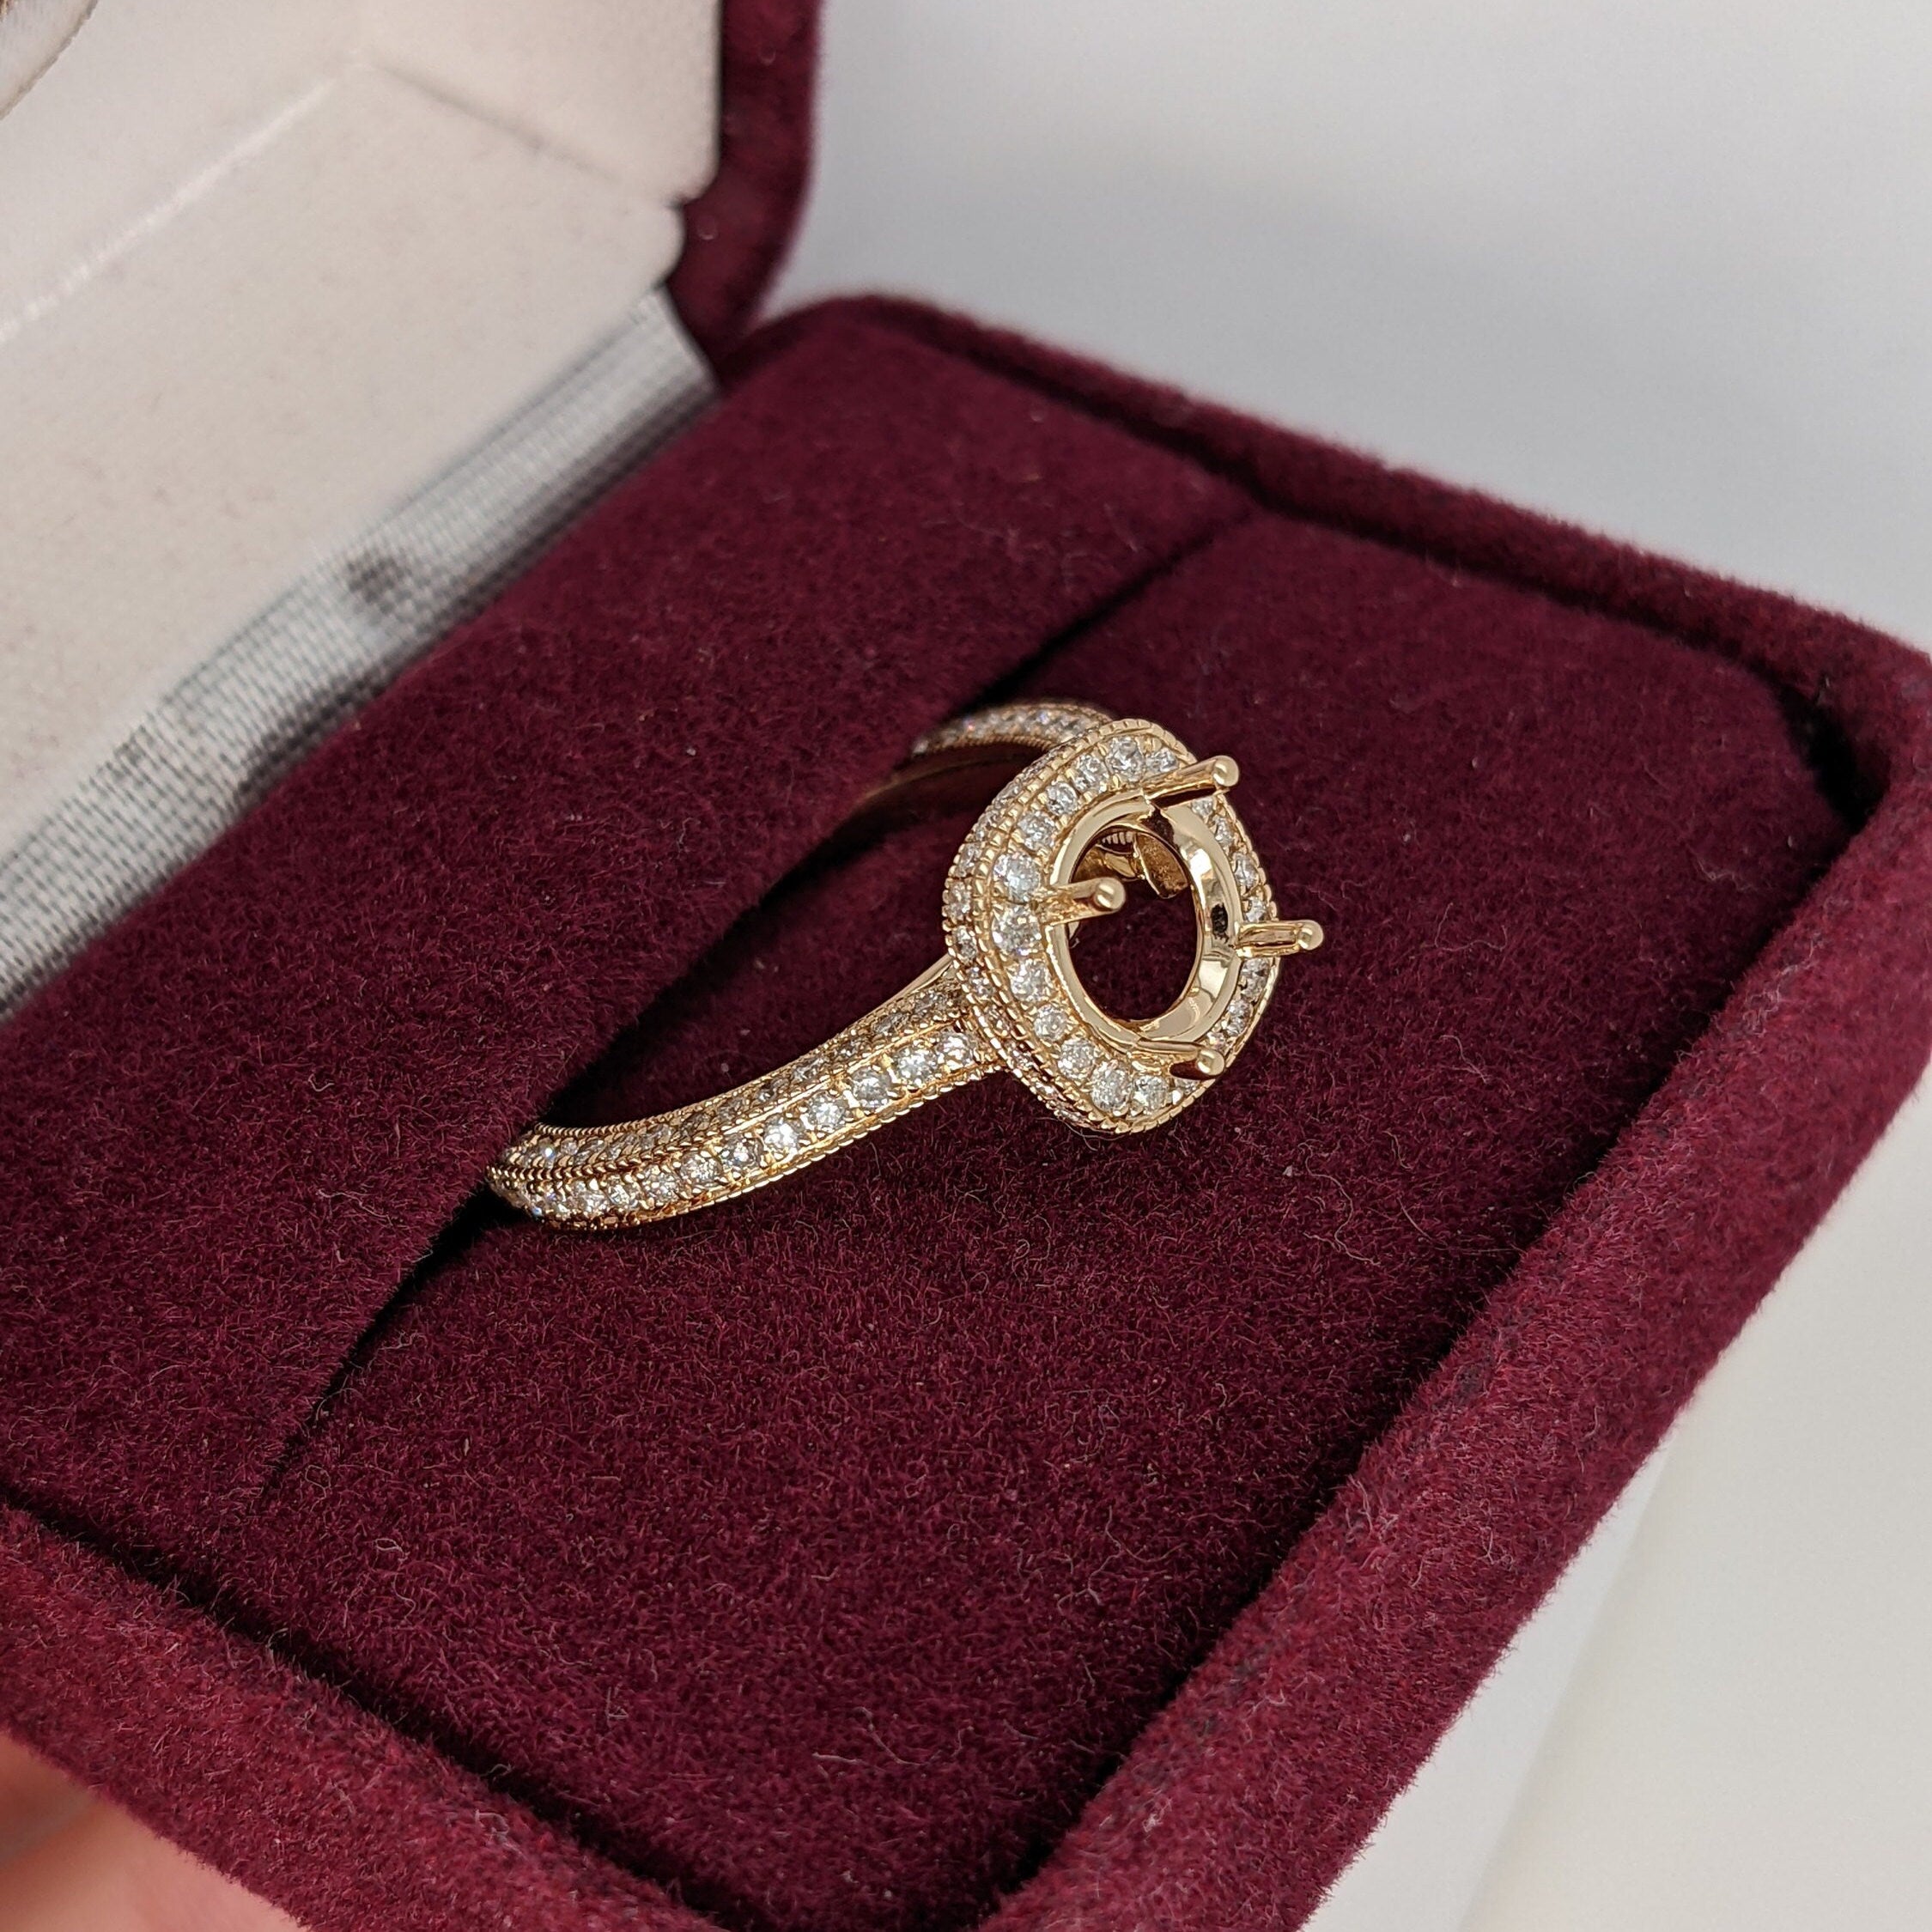 Stunning Vintage Inspired Ring Semi Mount with Diamond Halo and Pave Diamond Shank | Round 6.7mm | Brilliant Cut | Custom Sizes!